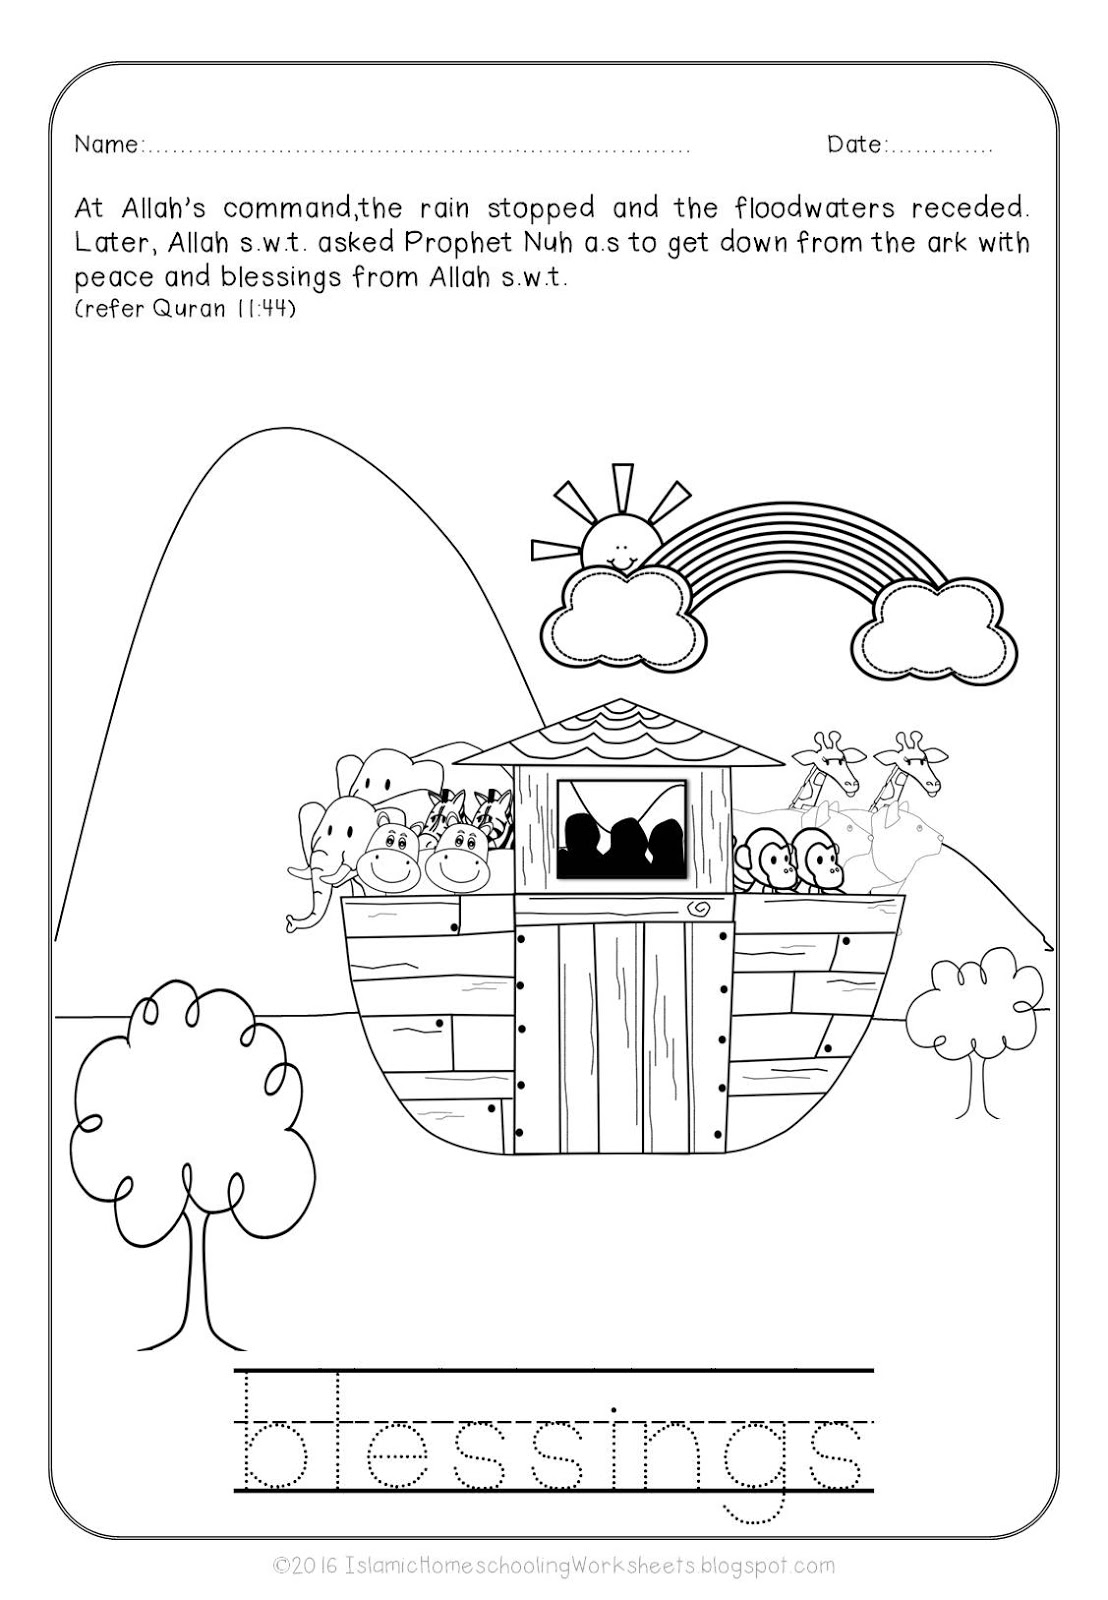 free-islamic-coloring-sheets-prophet-nuh-and-the-ark-story-islamic